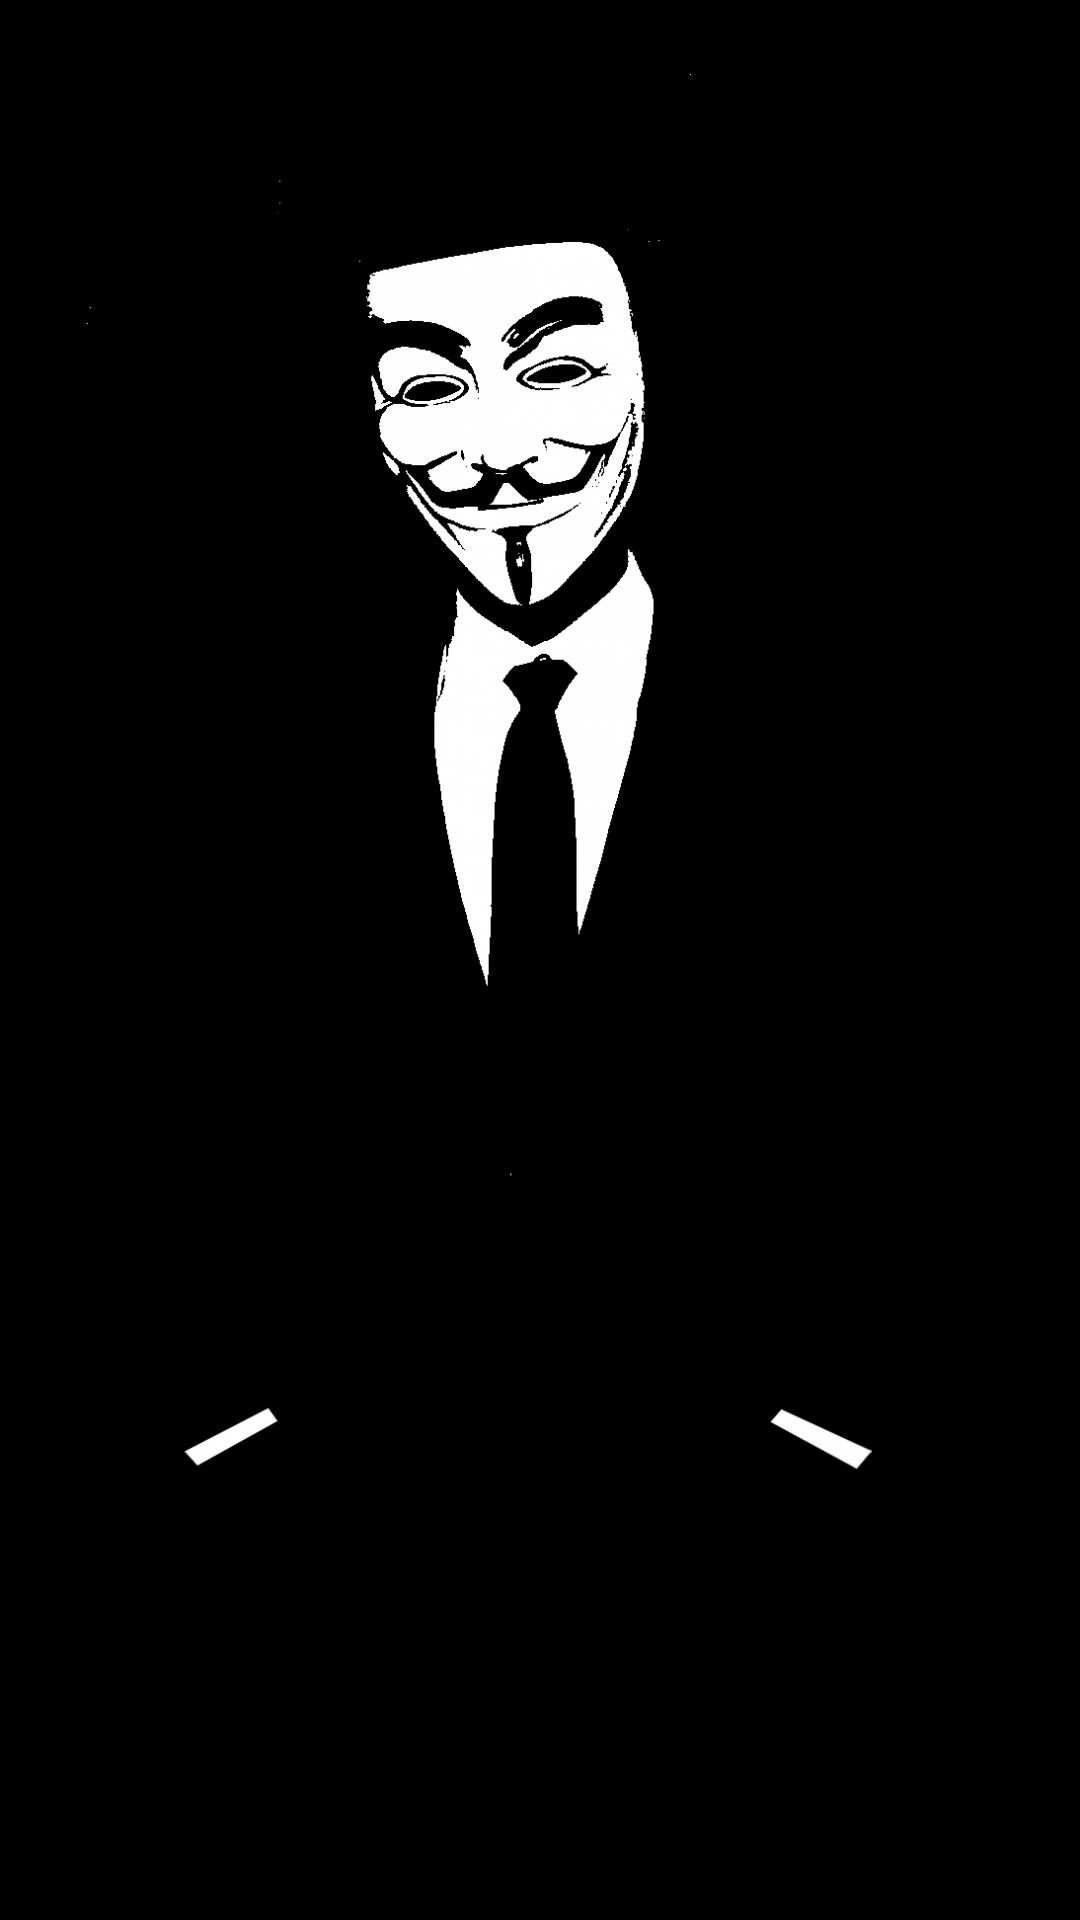 1080x1920 We have the best collection of Anonymous Wallpaper HD for Iphone for PC,  desktop, laptop, tablet and mobile device. Check and download them right  now!